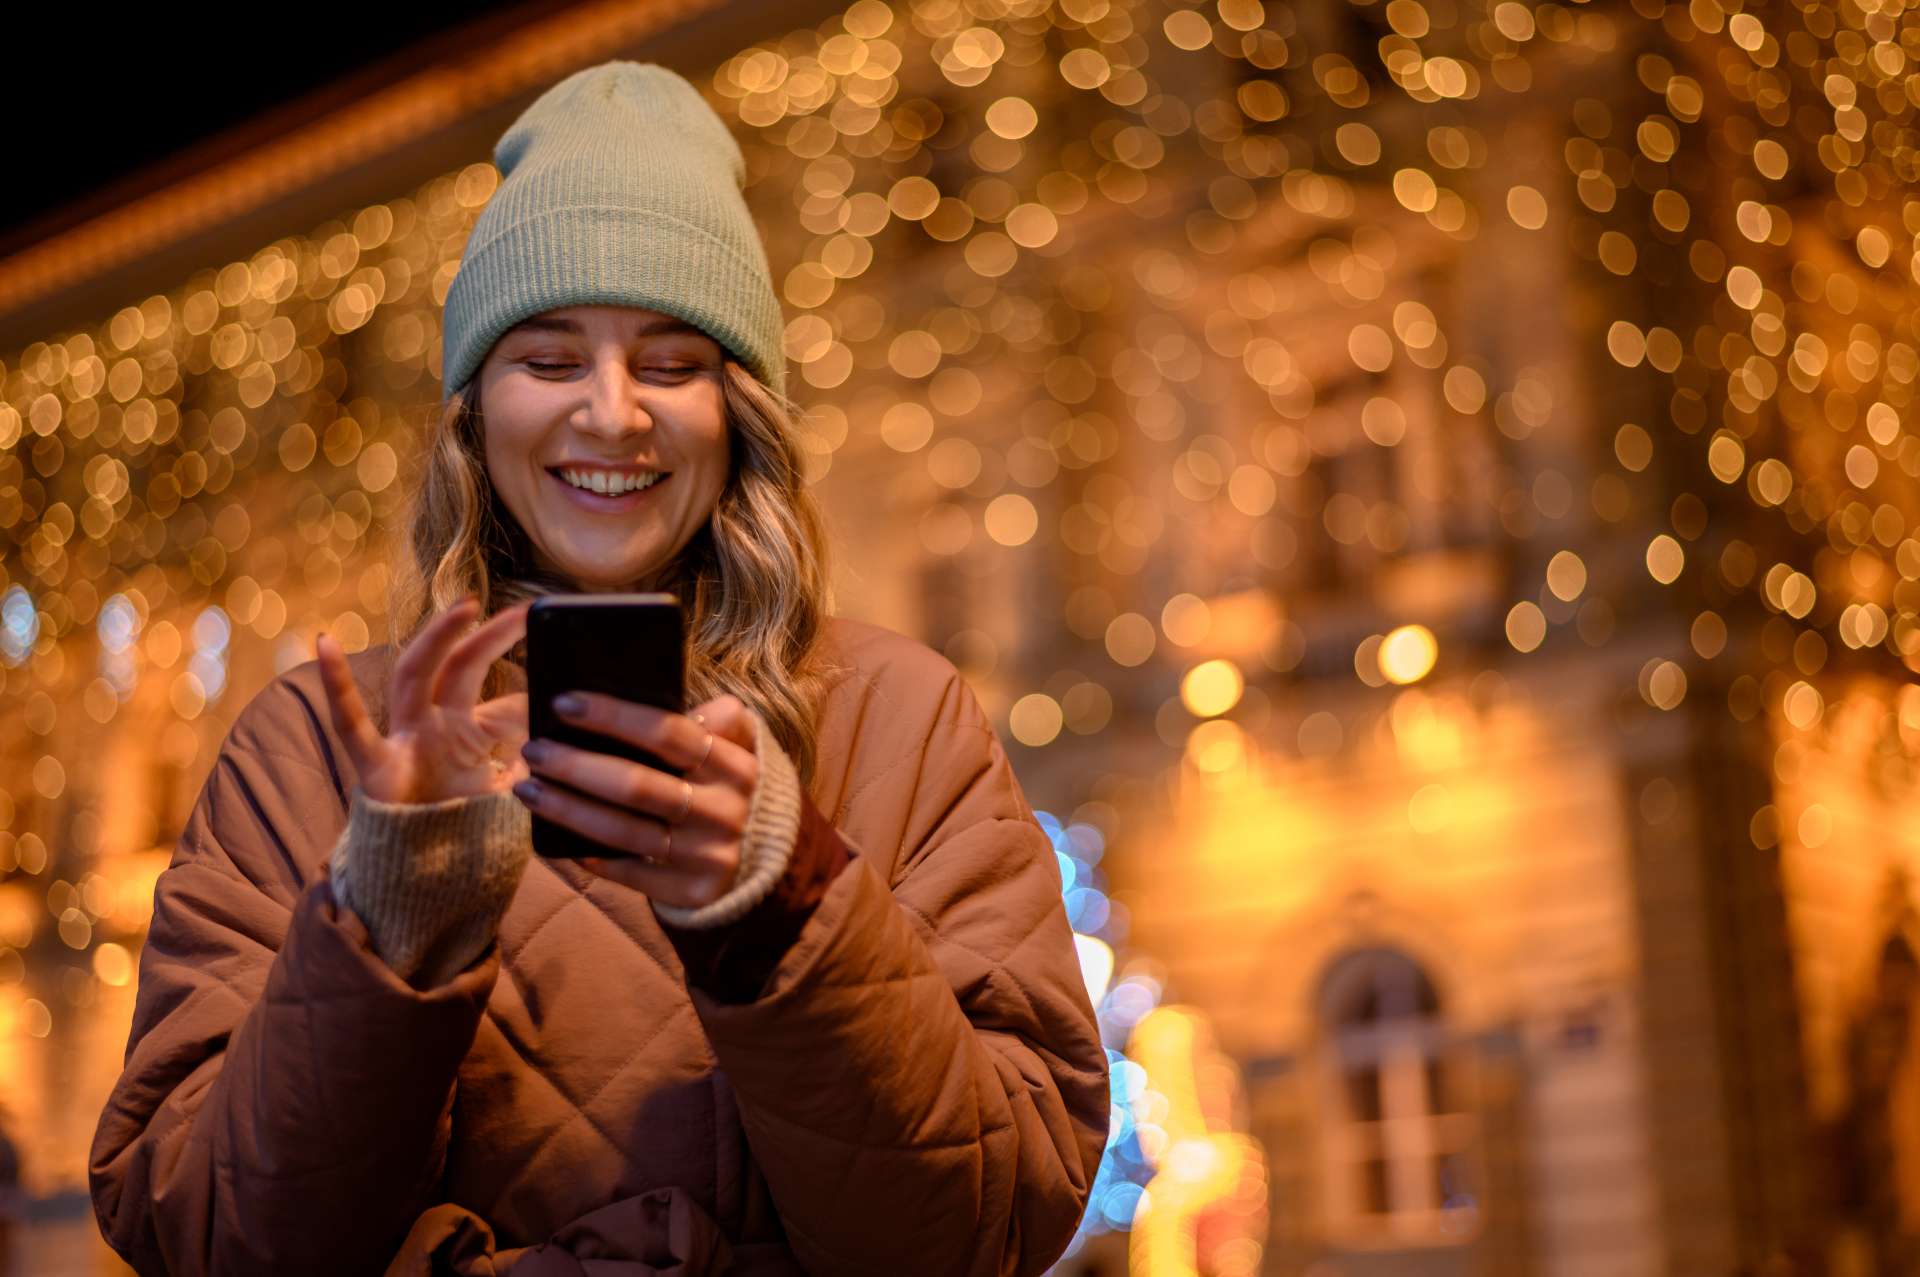 Woman in bobble hat outside a building with festive lights, smiling at her phone